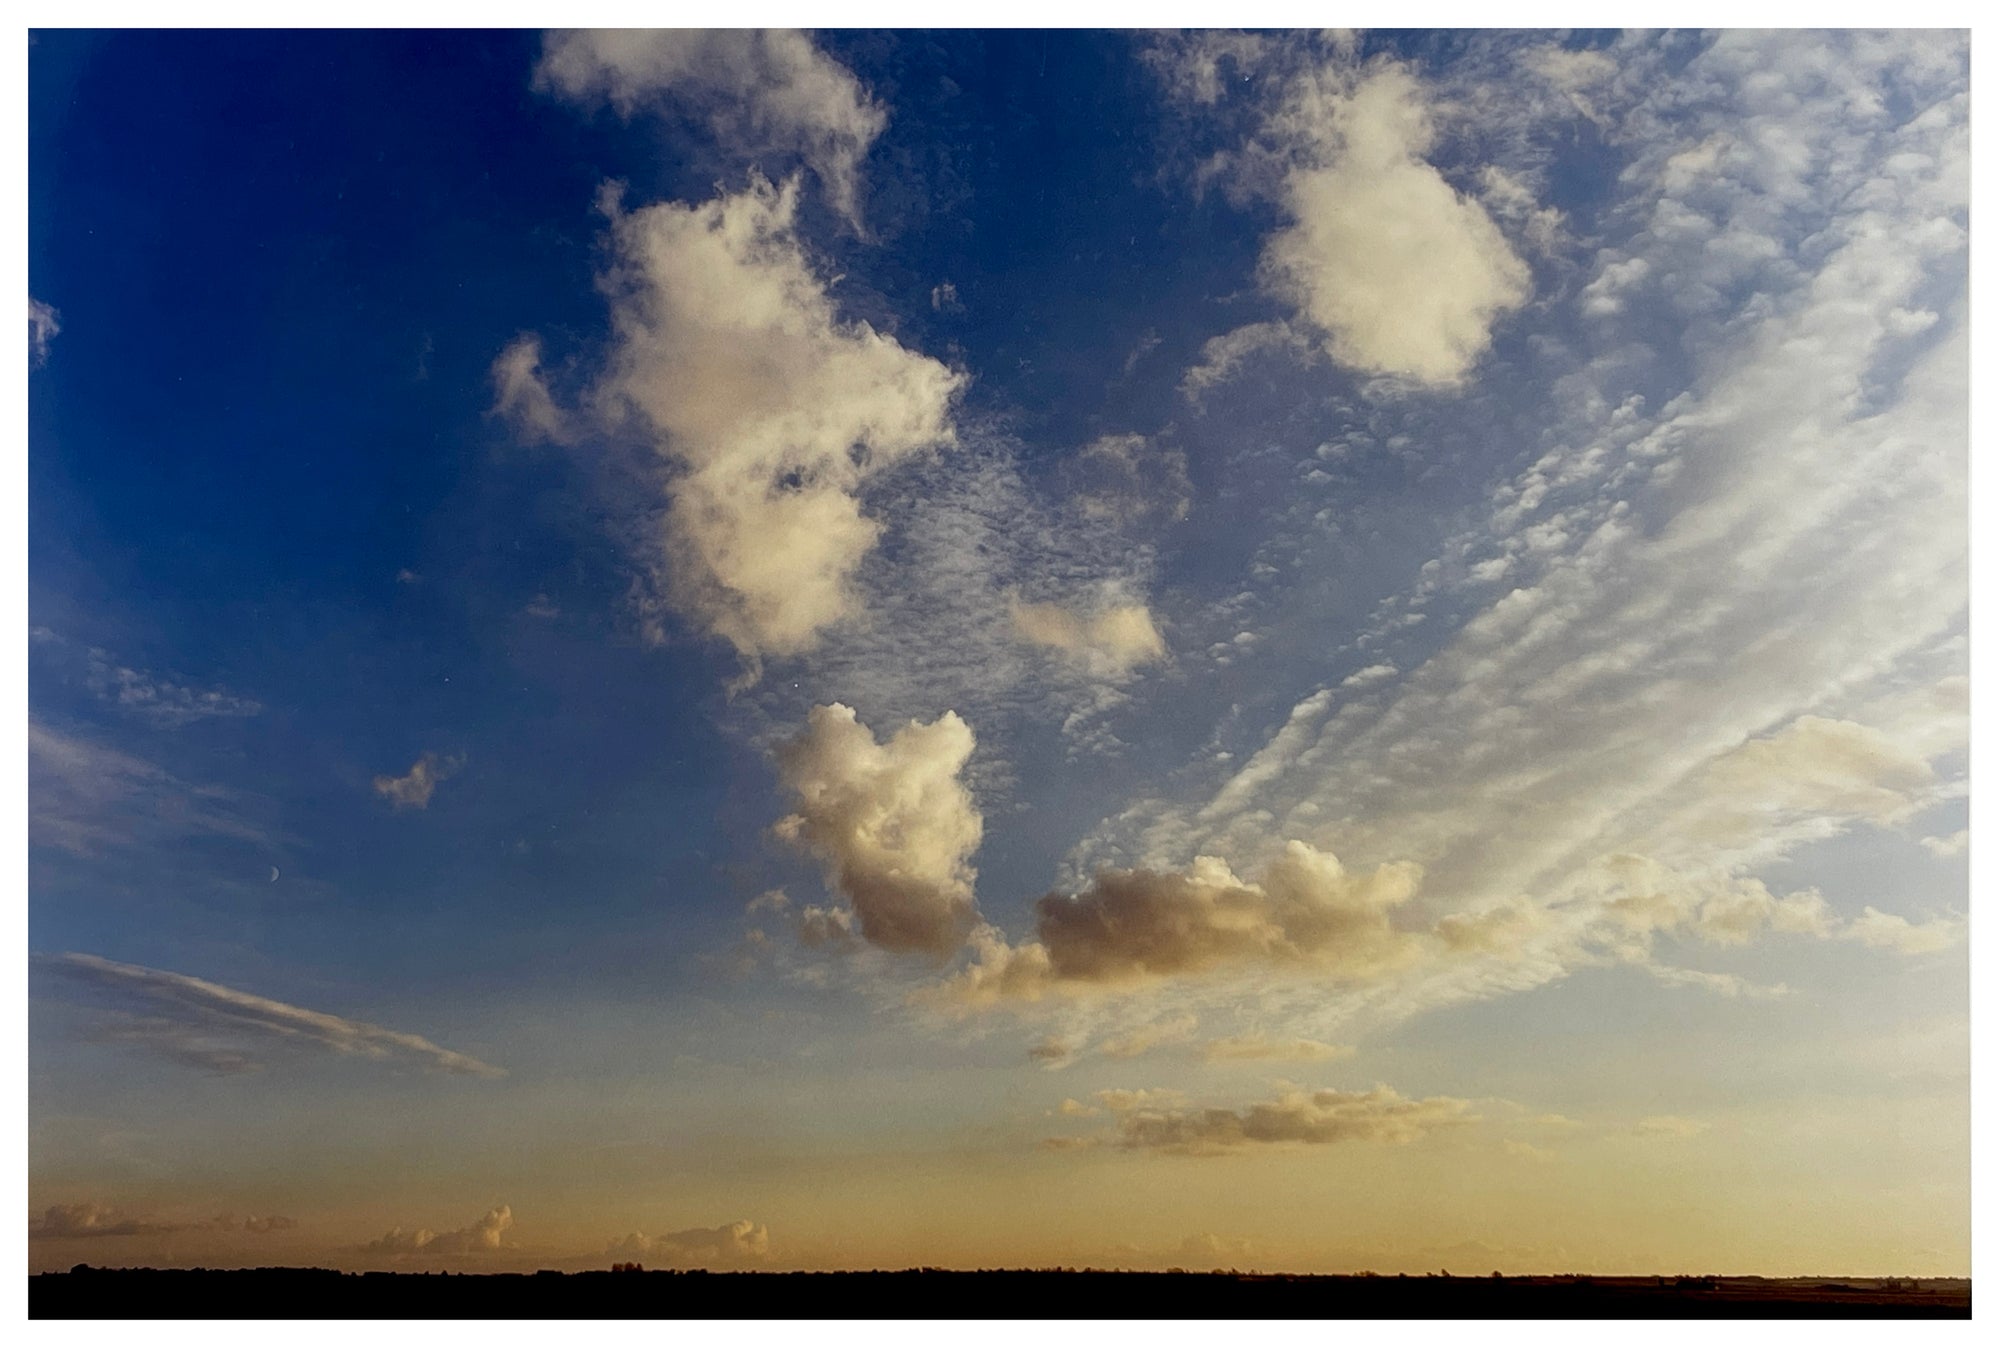 Photograph by Richard Heeps.  Clouds sit in a blue fen sky.